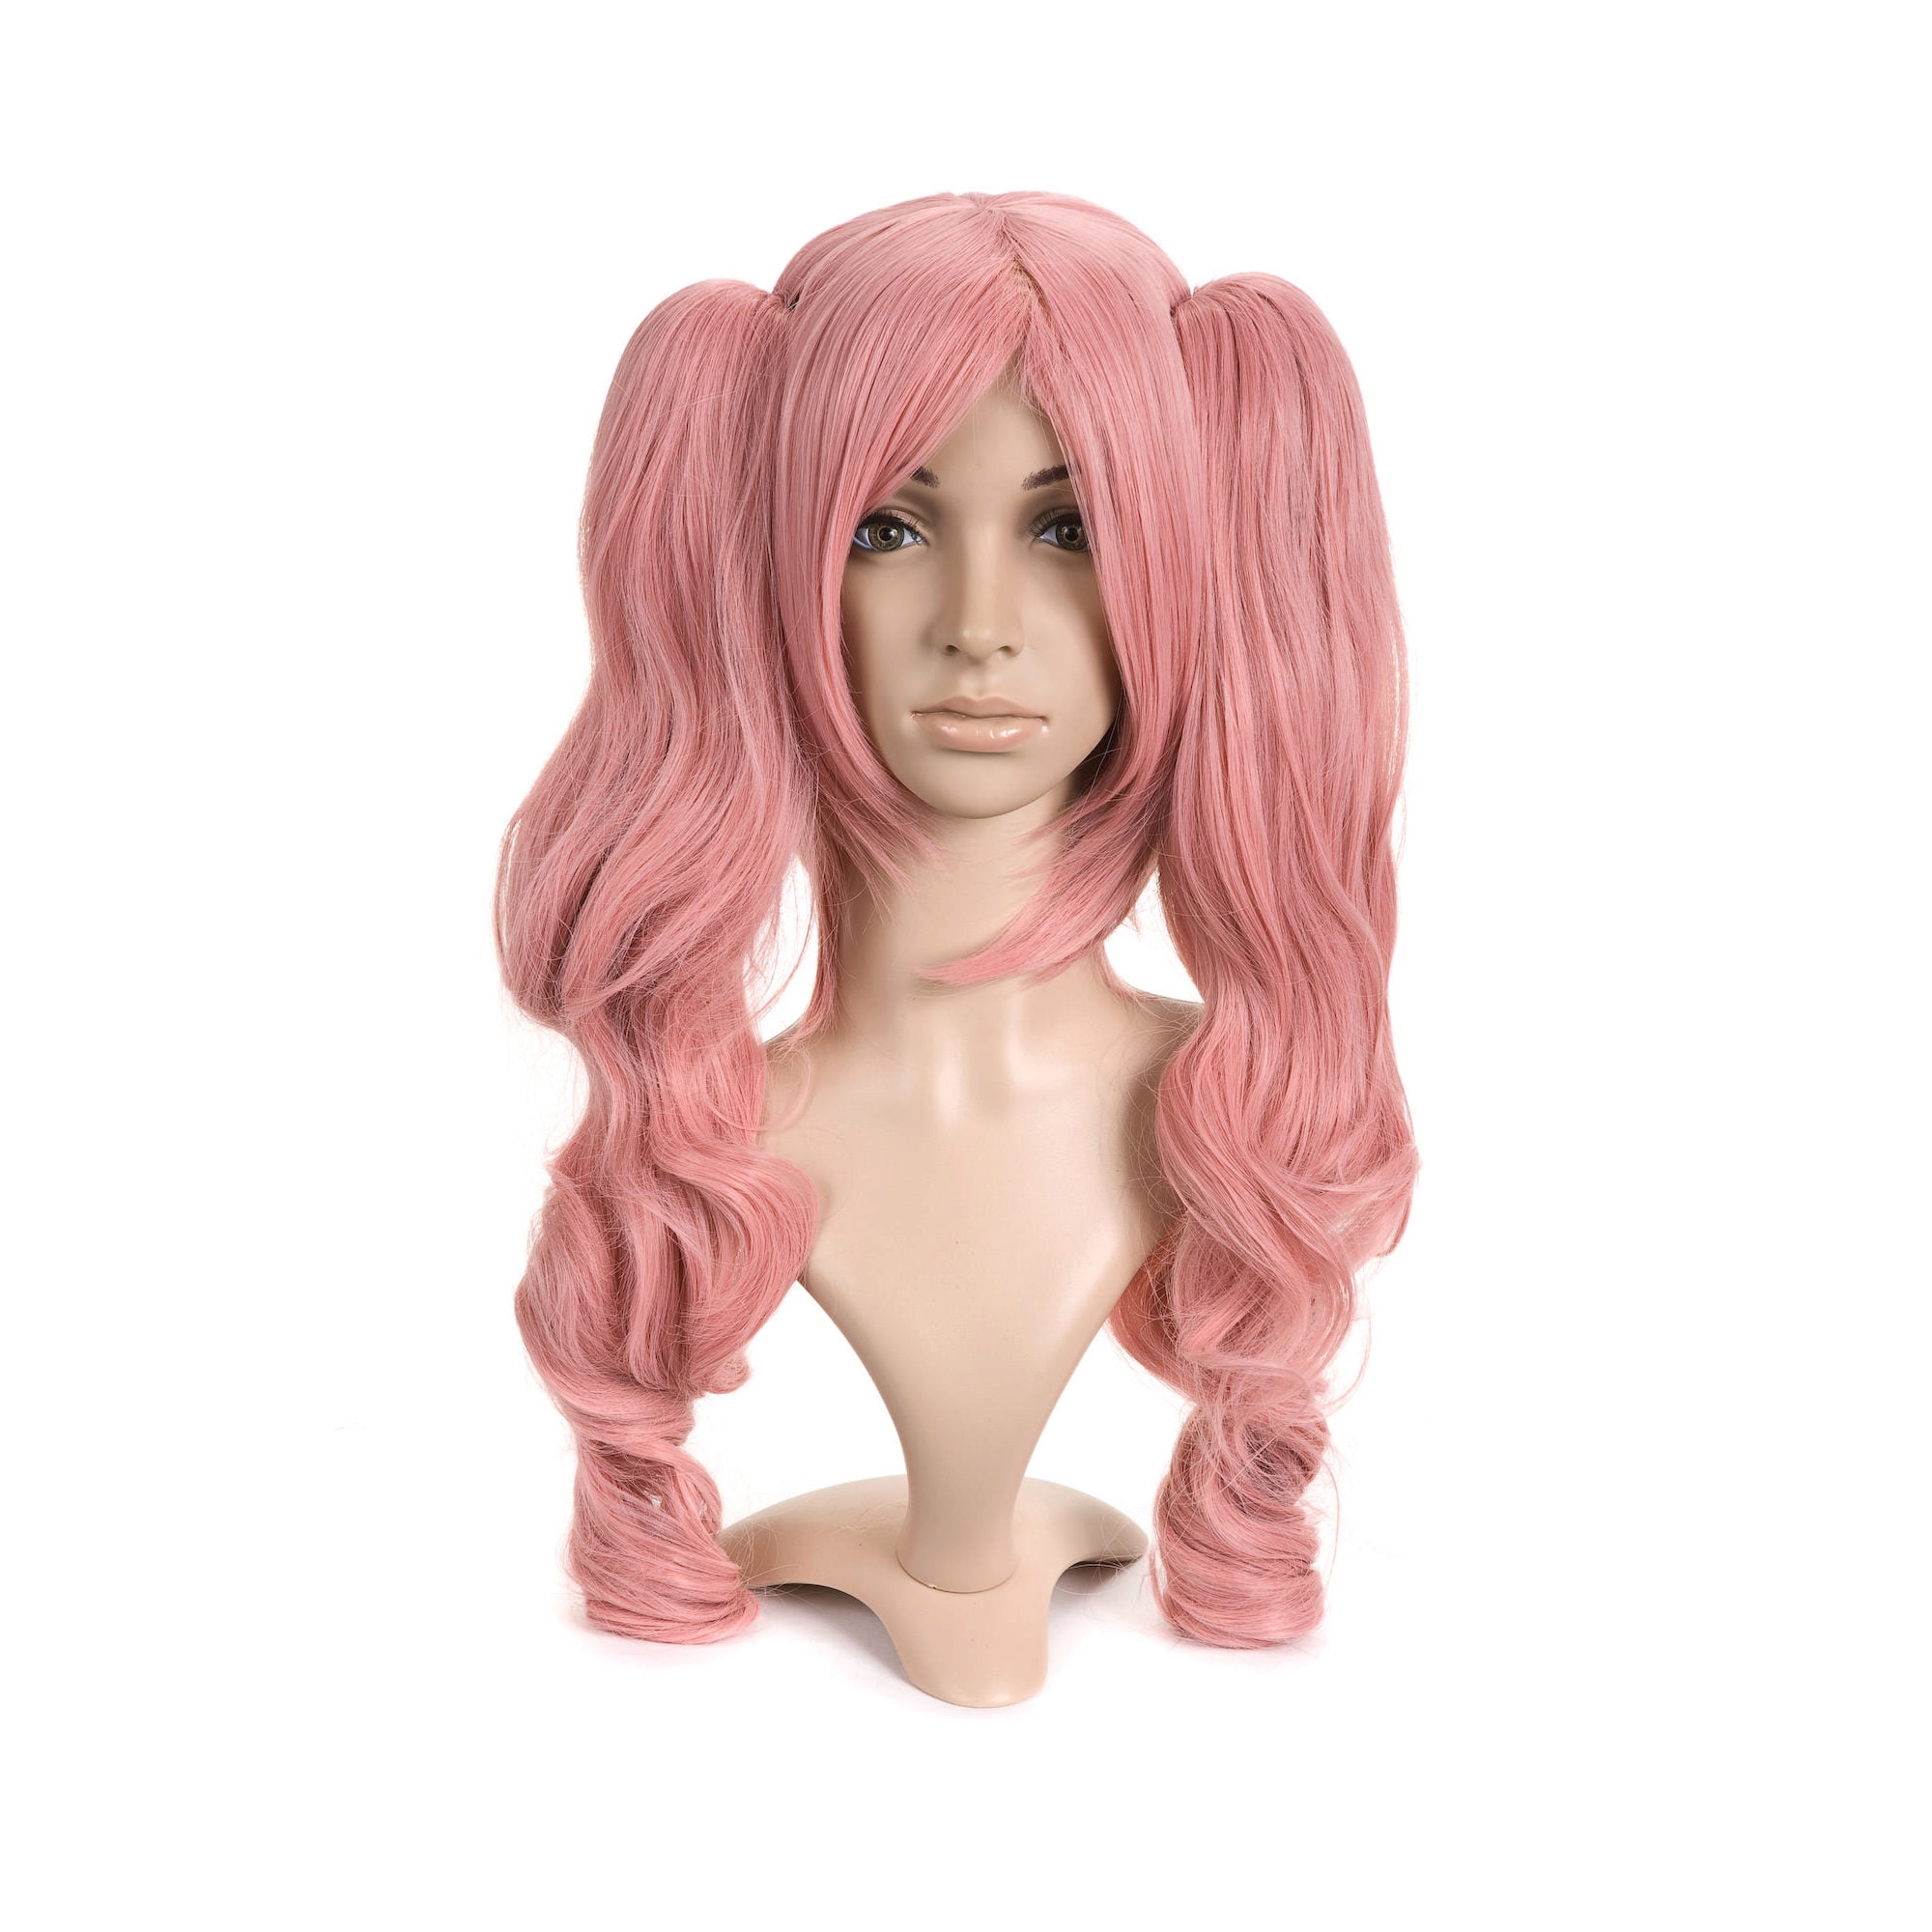 Pink Anime Costume Cosplay Wig W Long Curly Pigtails Walmart Com Walmart Com